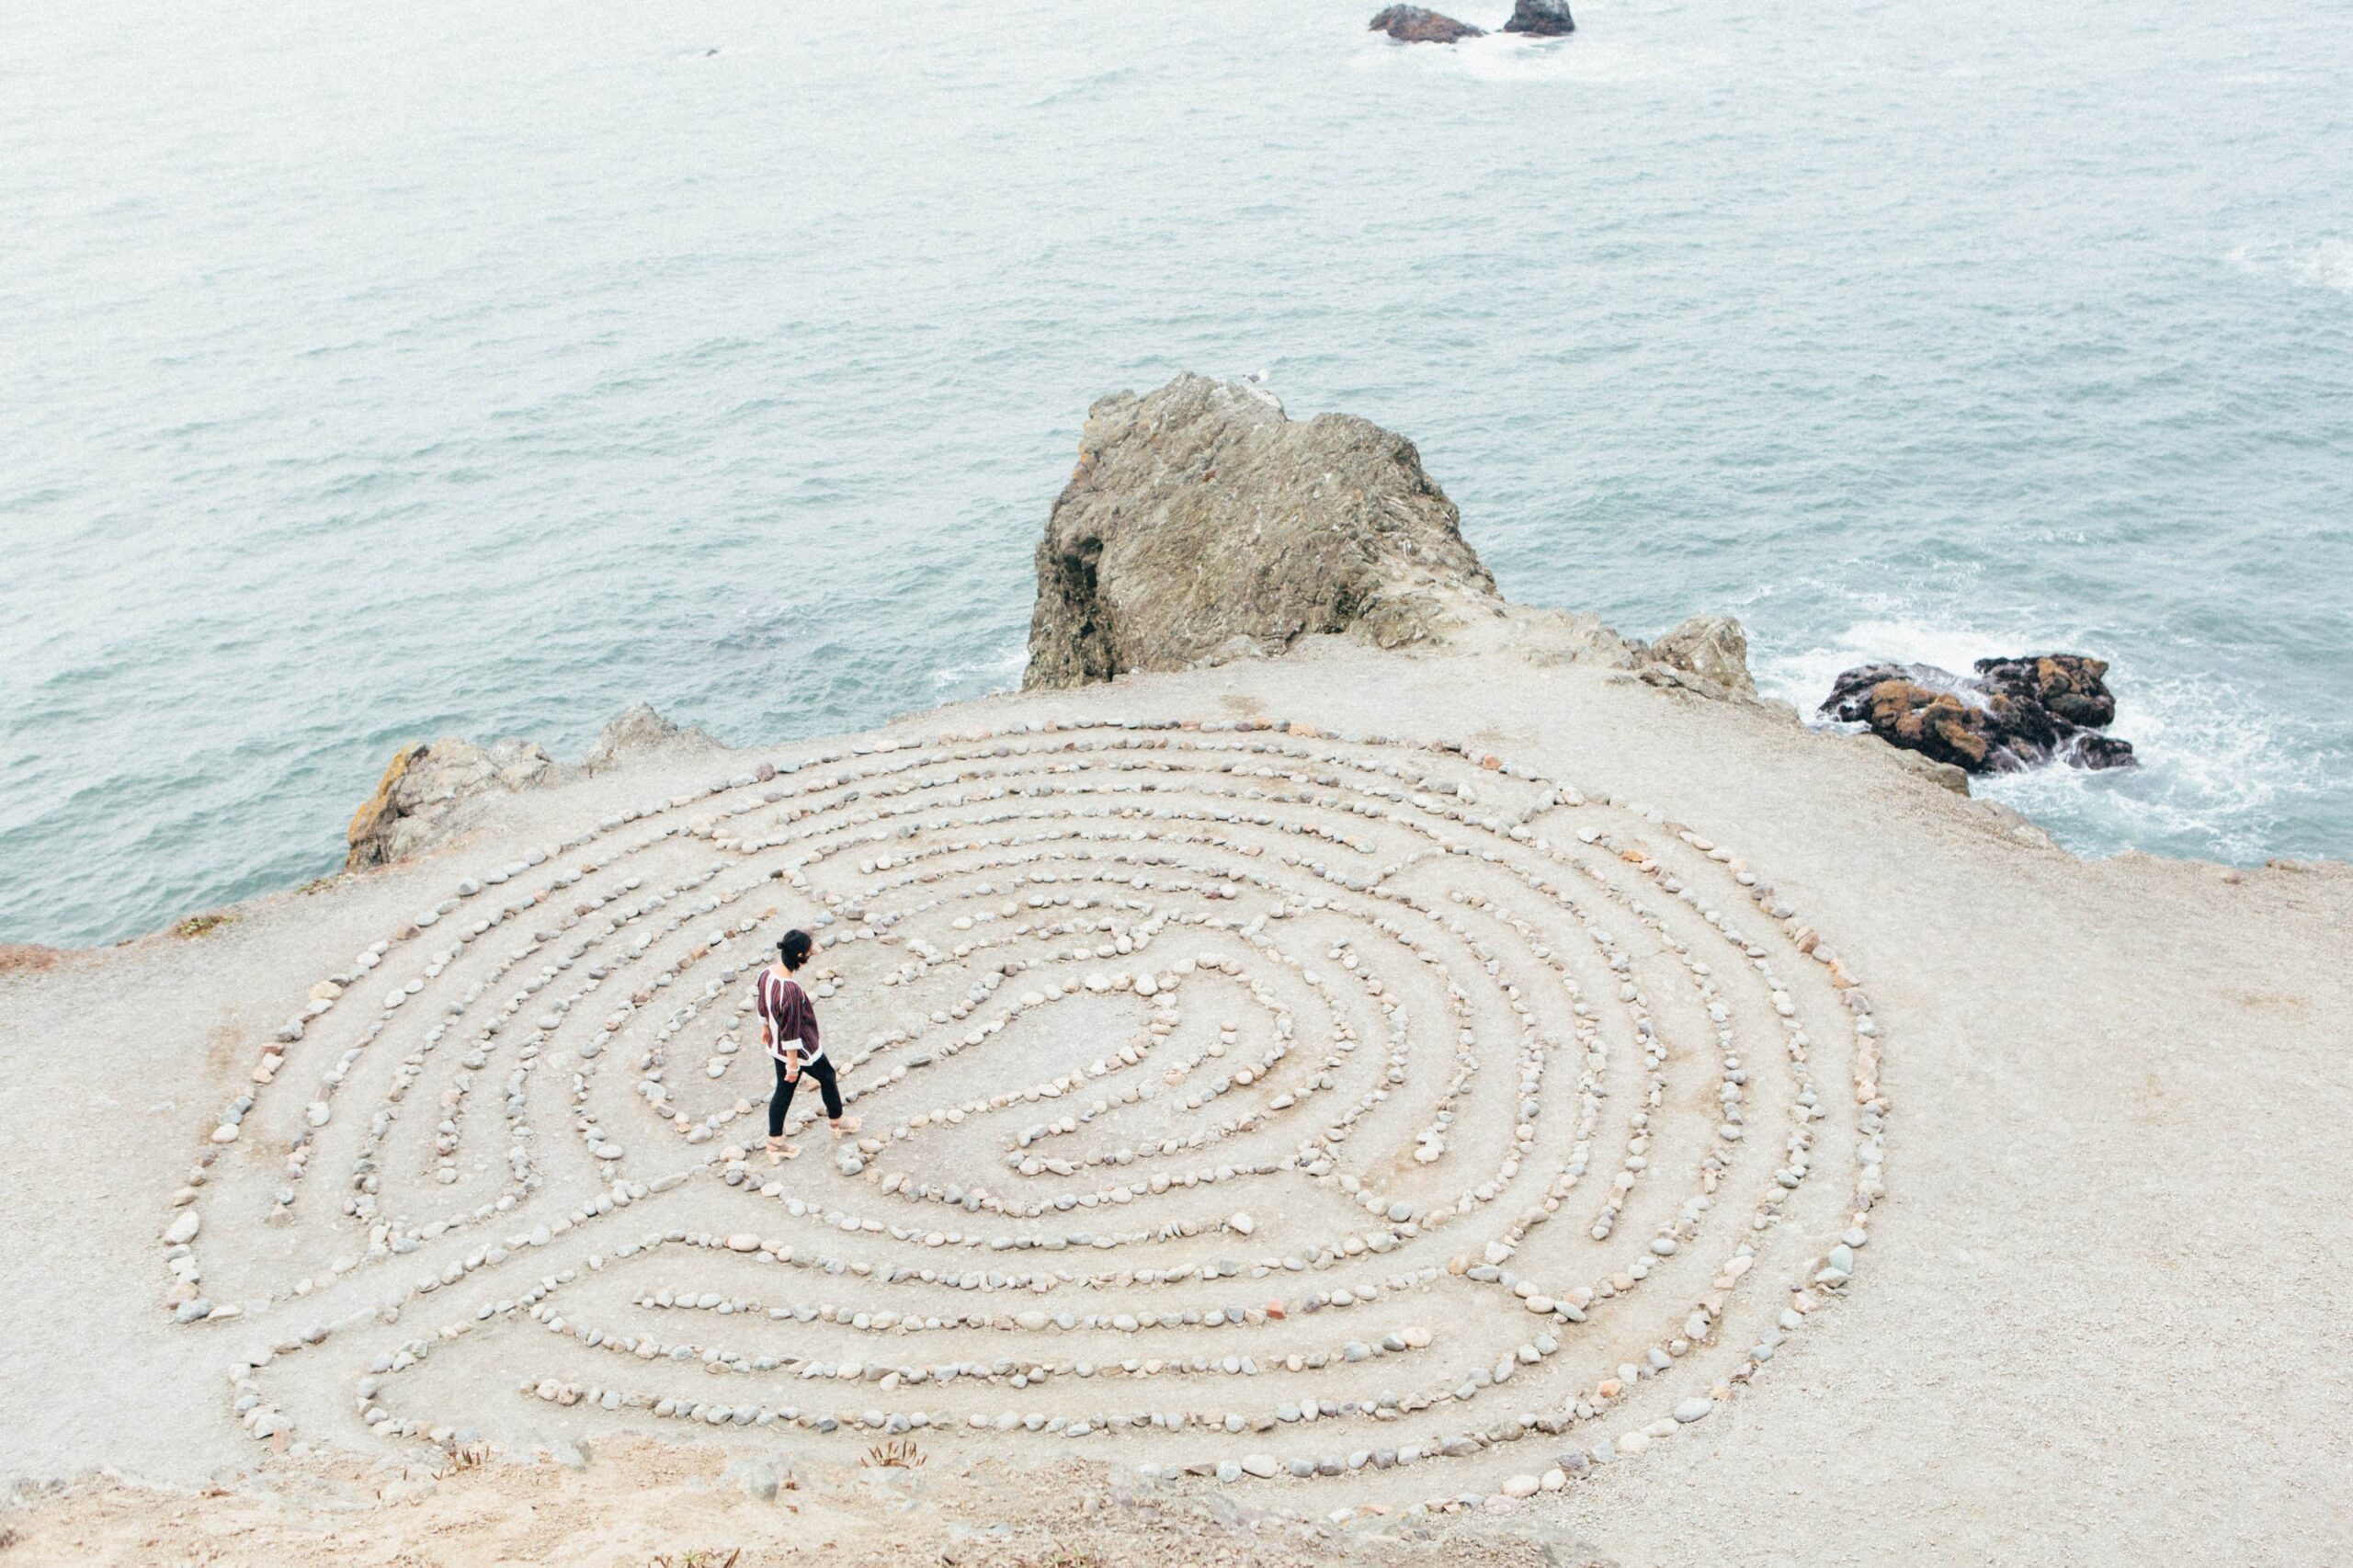 A person walking through a small stone maze on a sandy cliff near the water